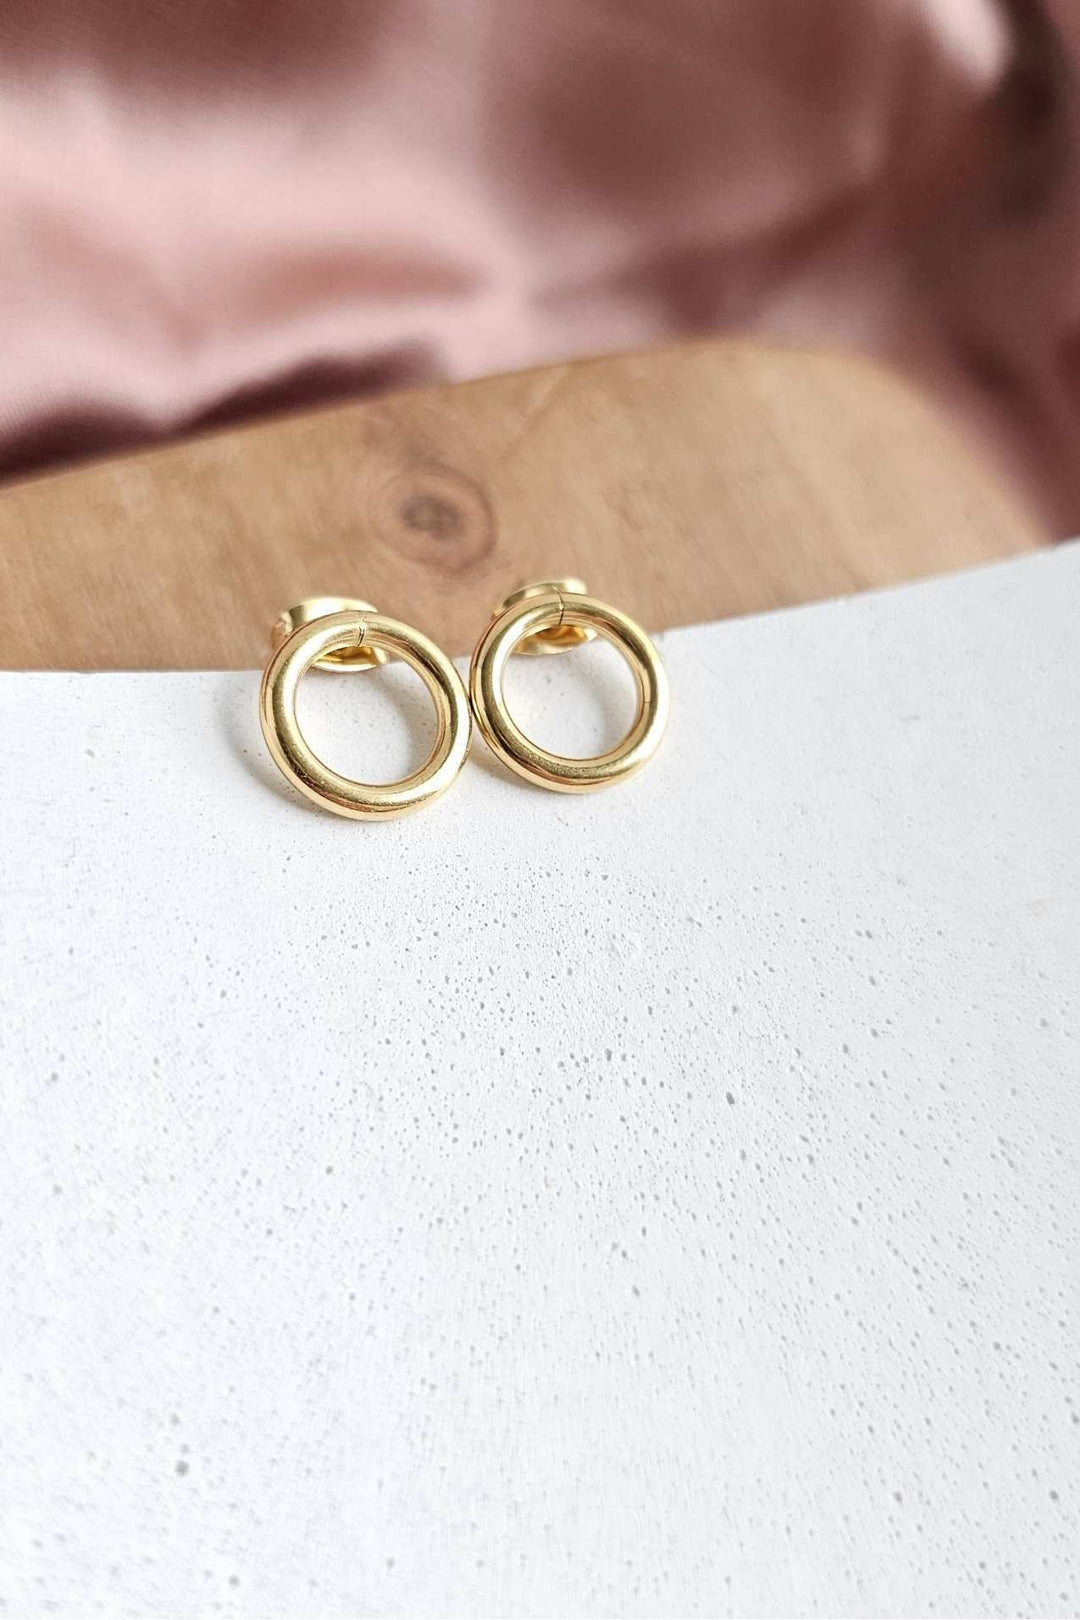 Gold Circle Stud Earrings - Inspired Eye Boutique